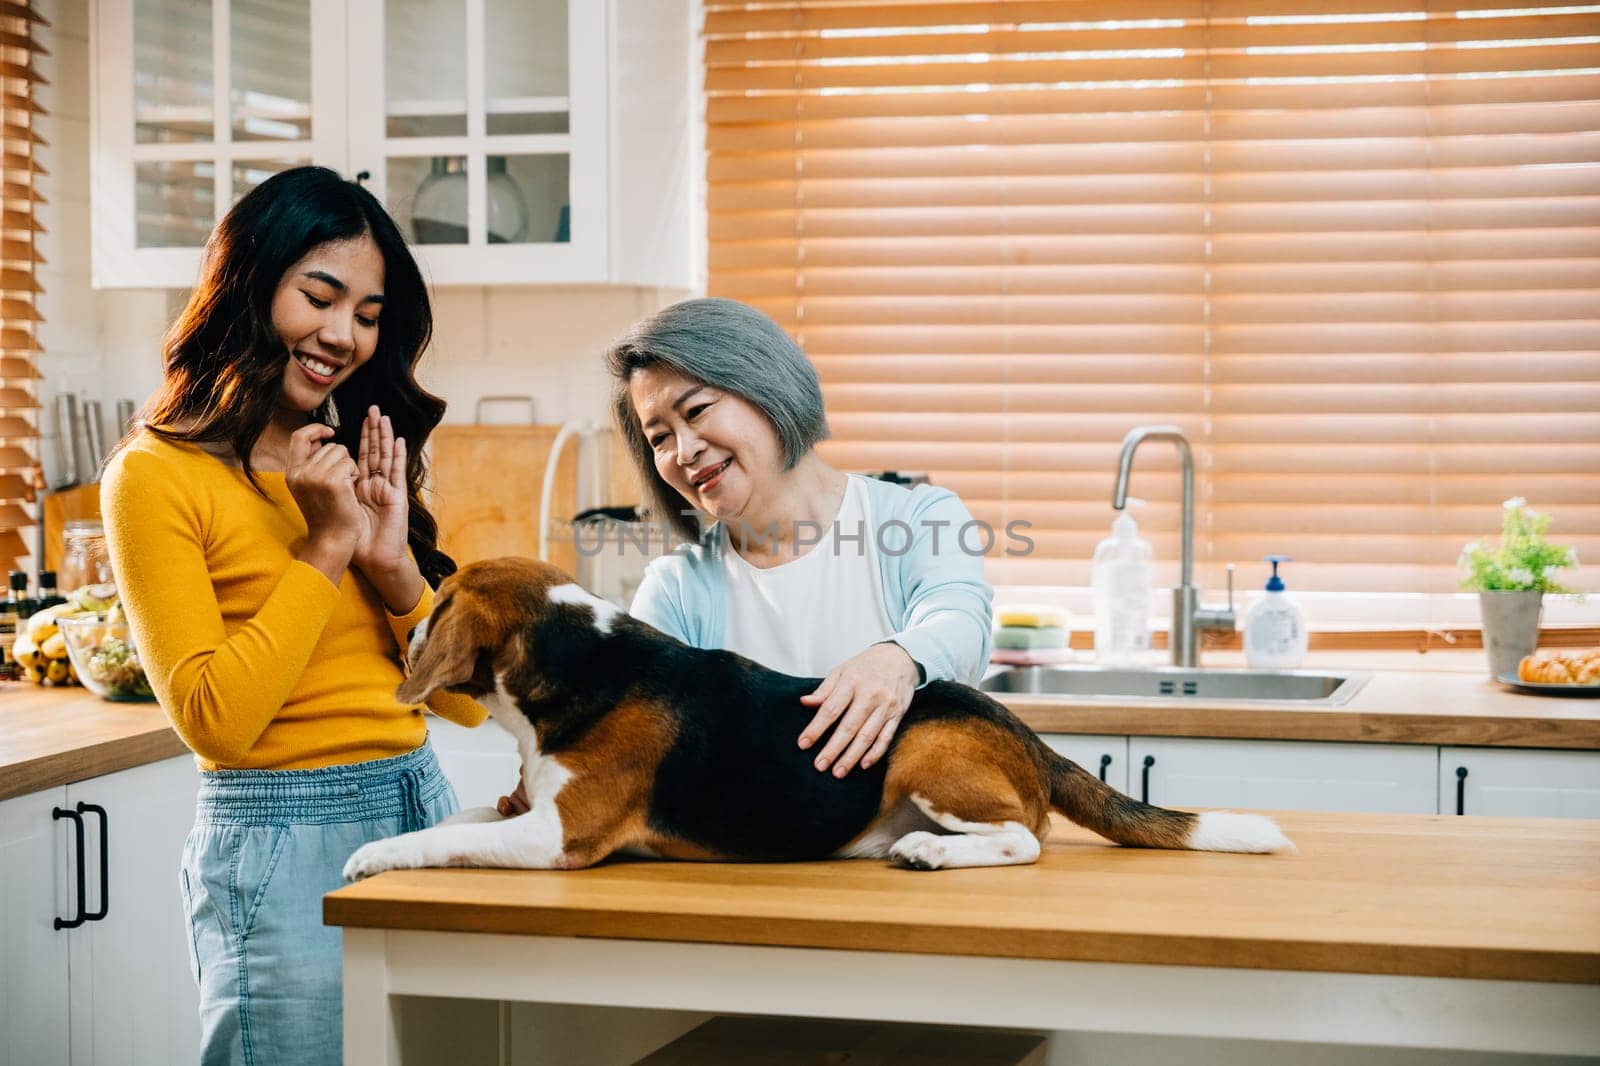 An Asian family in the kitchen, including the grandmother and daughter, enjoys quality time playing with their Beagle dog. Their smiles reflect the fun, togetherness, and family happiness. by Sorapop